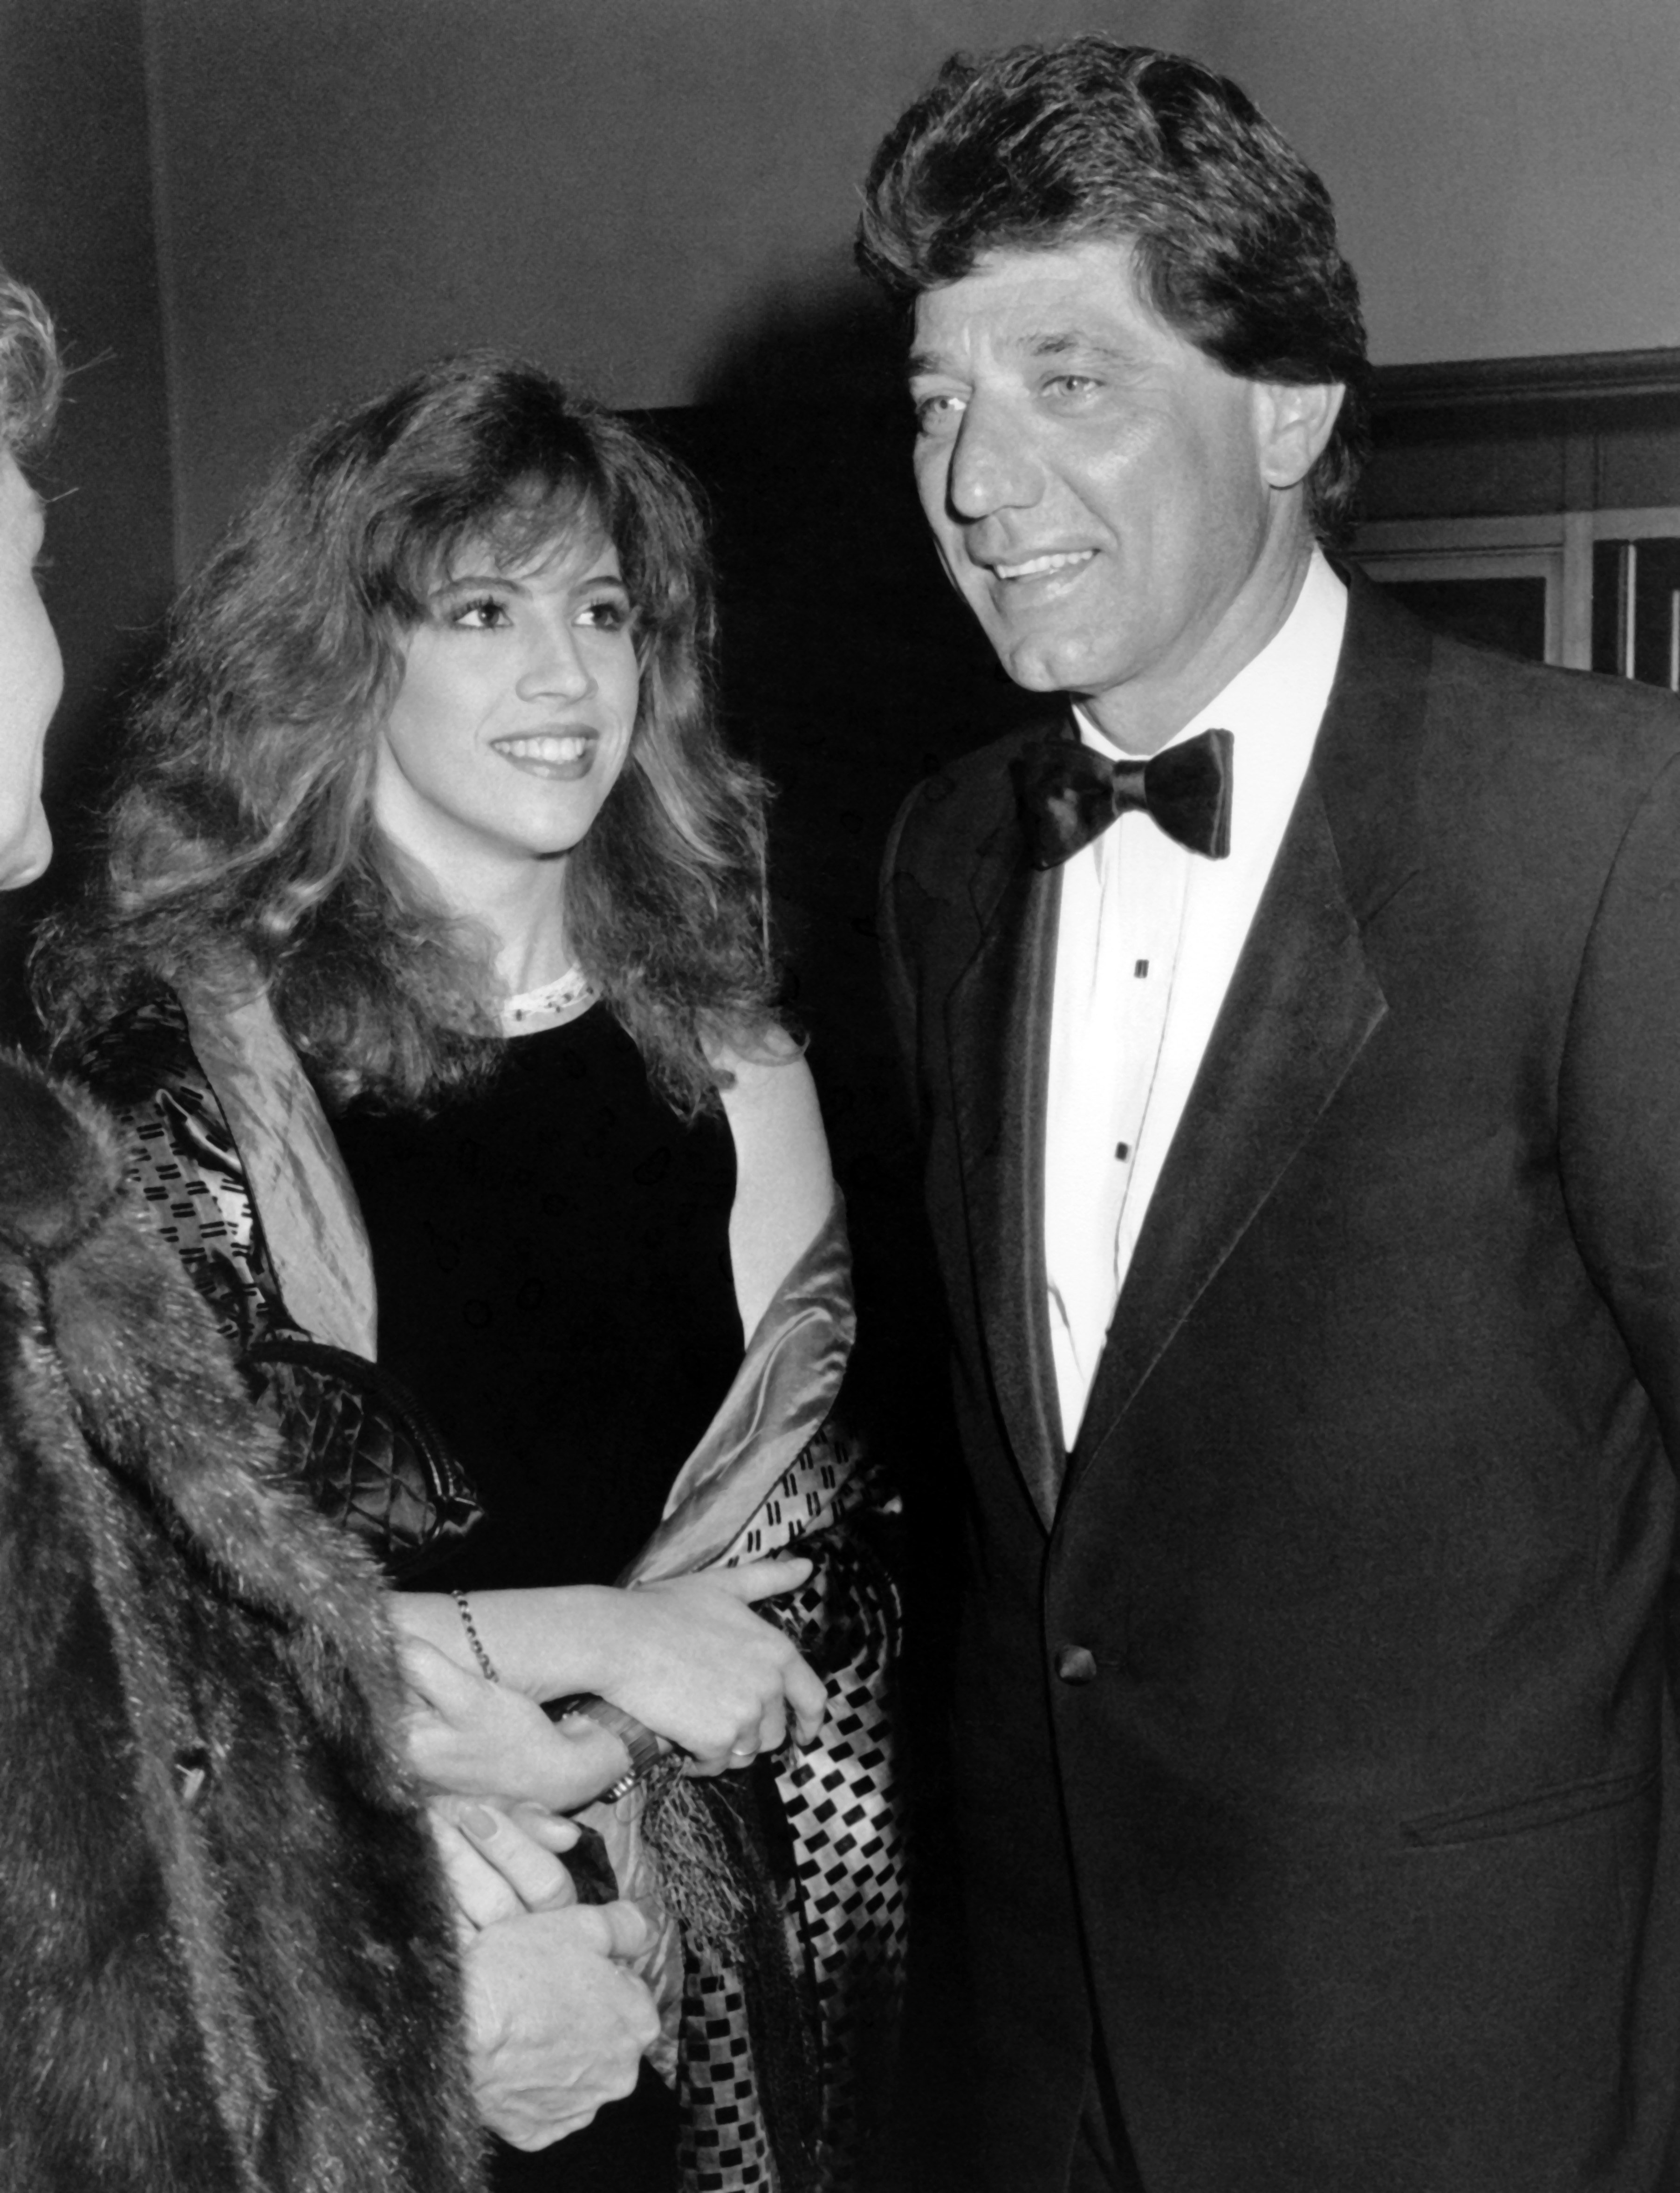 Joe Namath and his ex-wife Deborah Mays arrive at the American Cinematheque Awards in Los Angeles, California circa 1980s. | Source: Getty Images